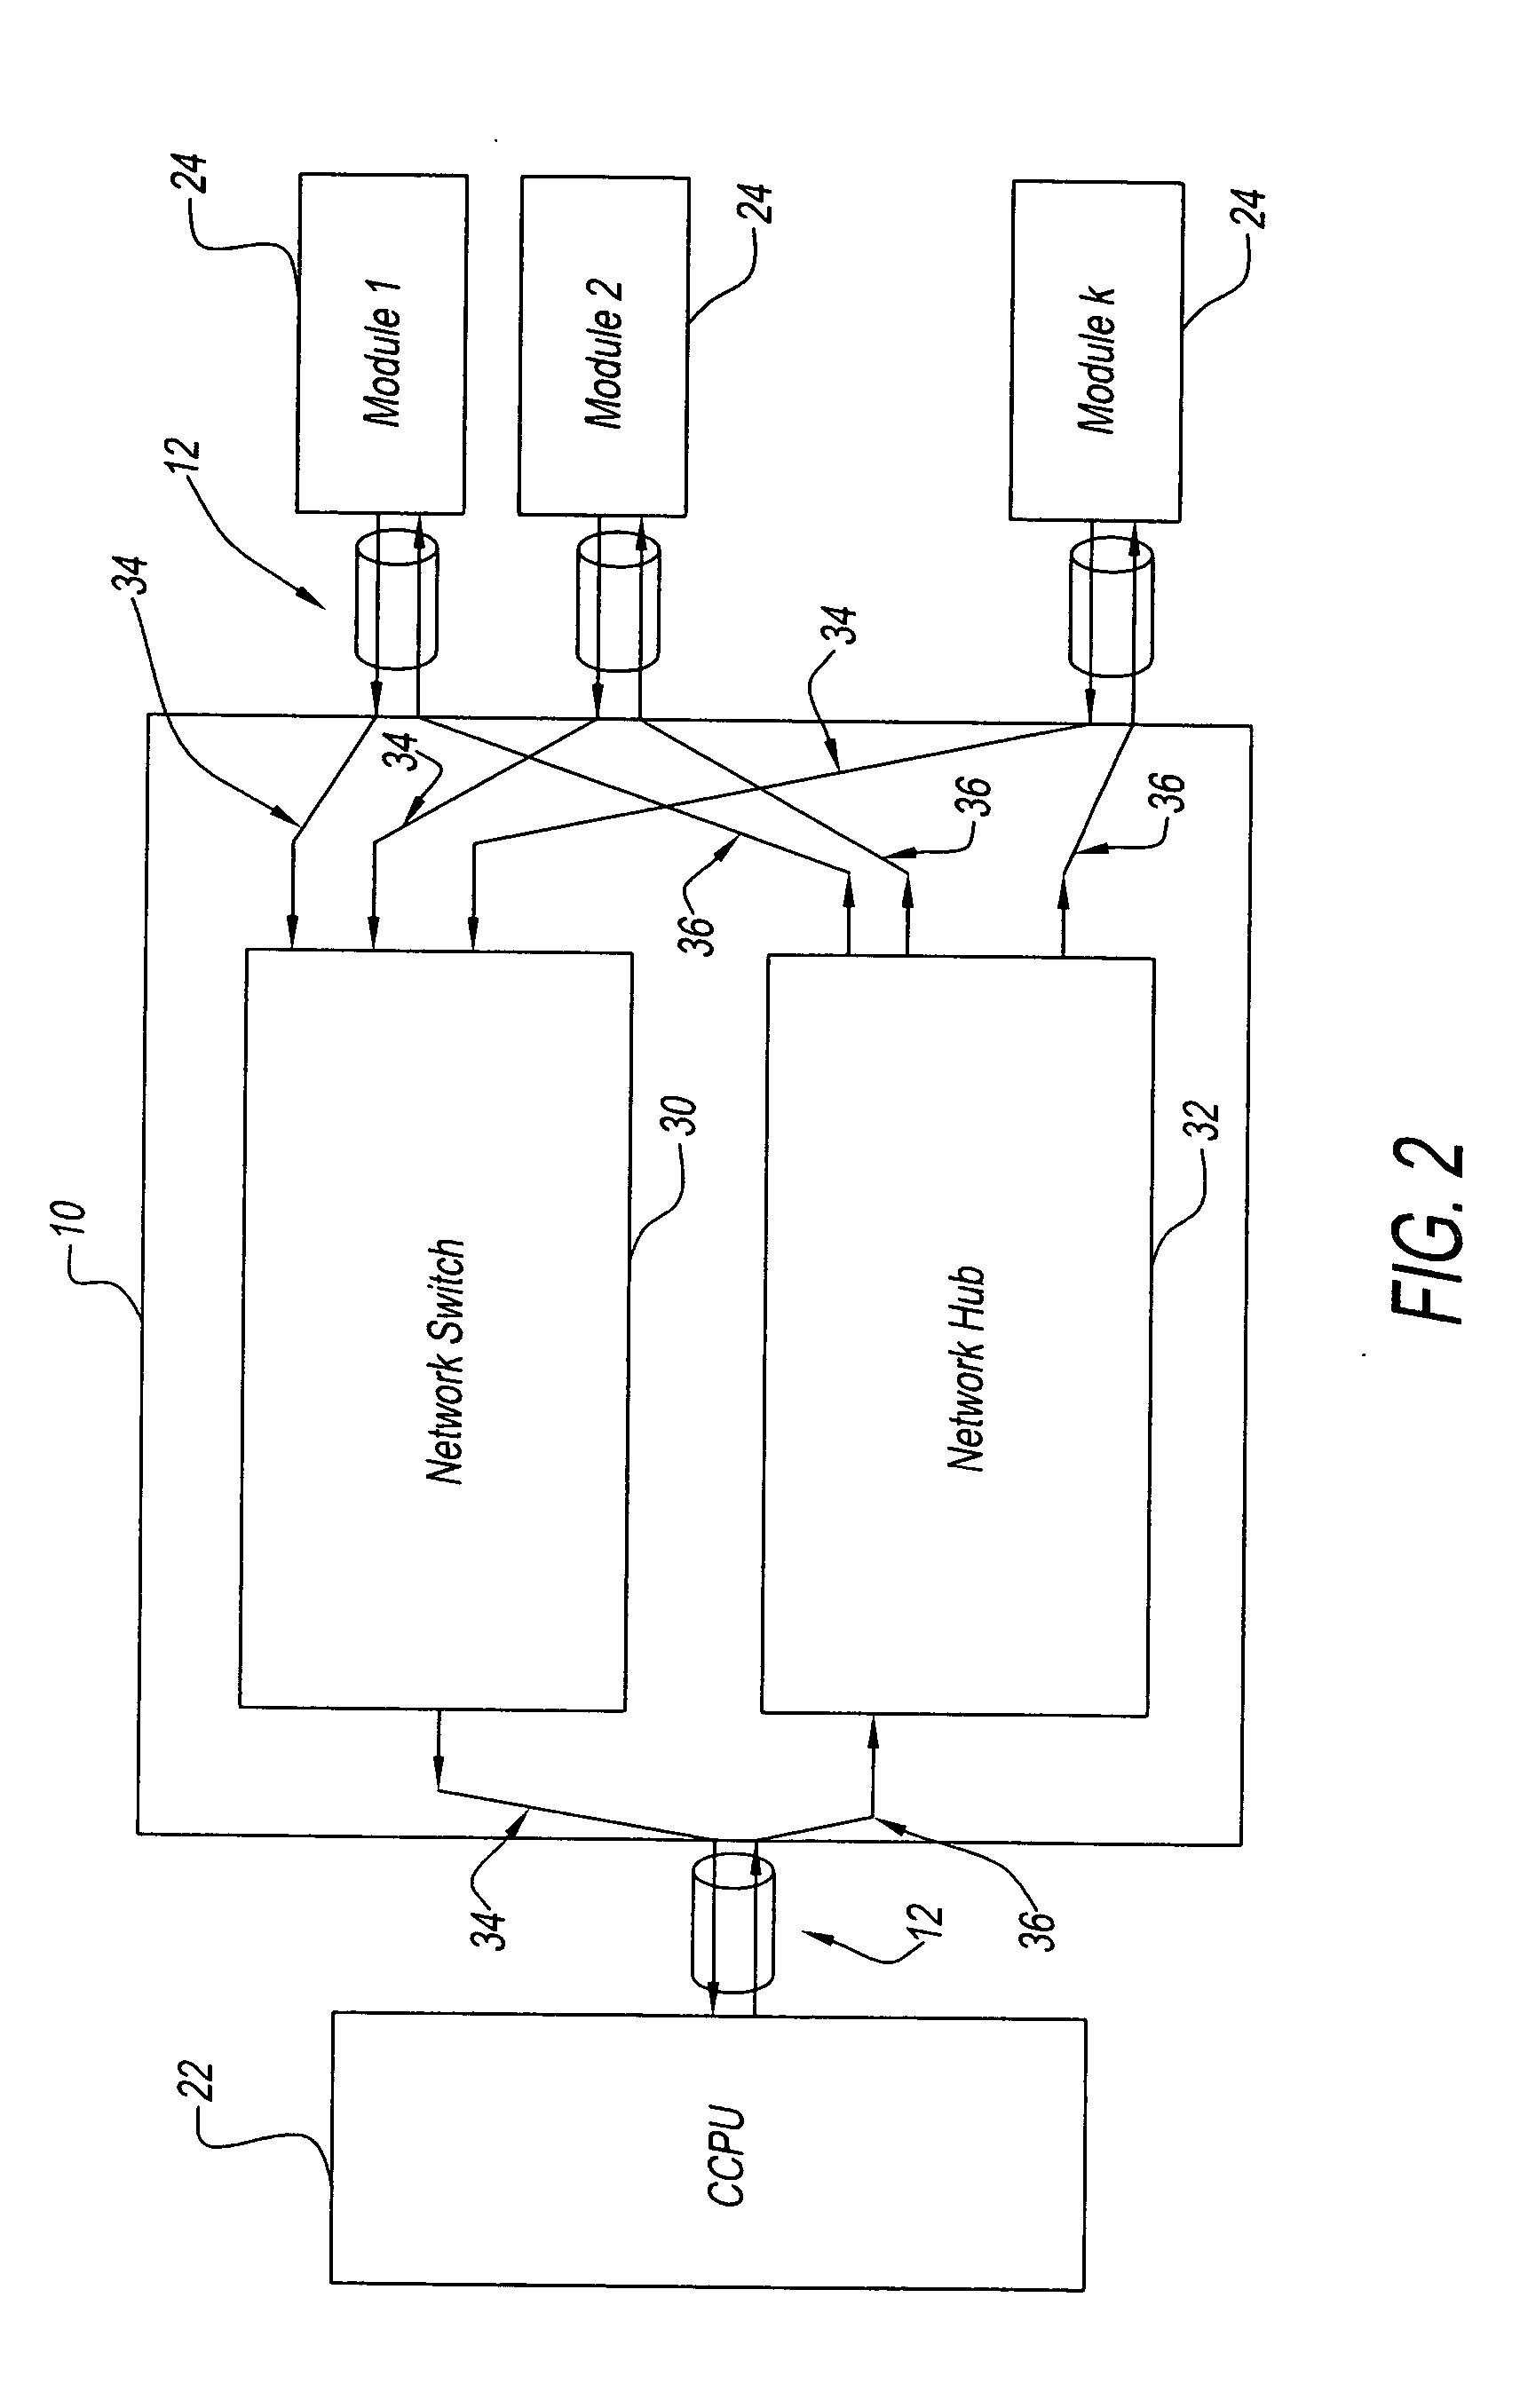 High performance network communication device and method